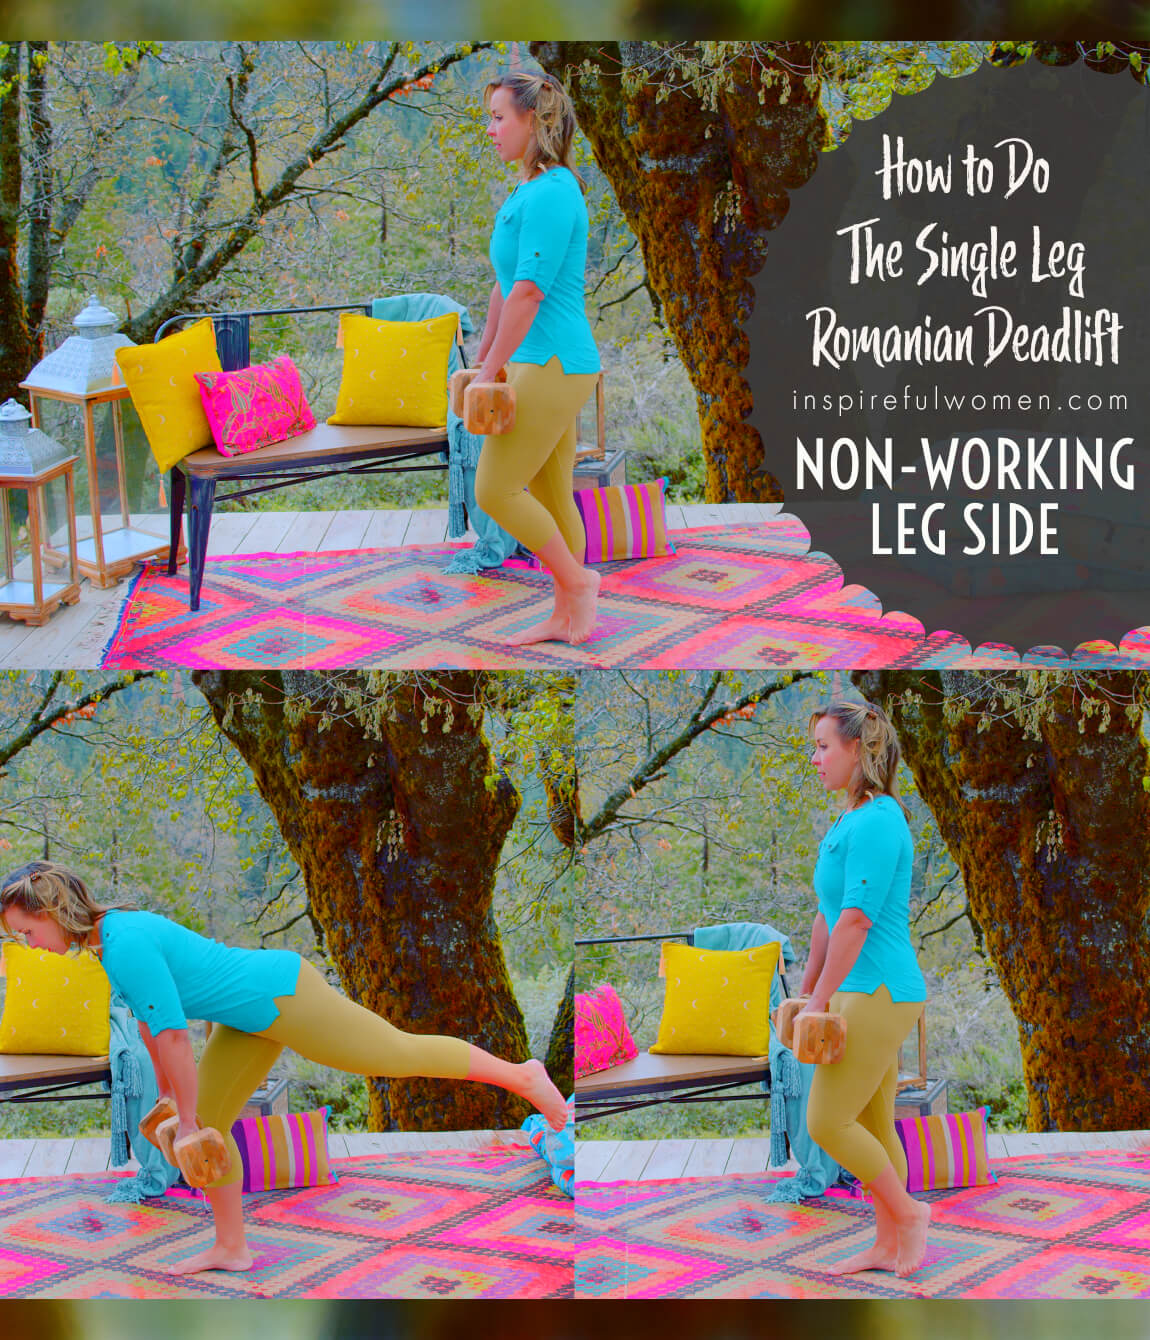 how-to-one-leg-romanian-deadlift-dumbbell-glutes-hamstrings-toning-exercise-proper-form